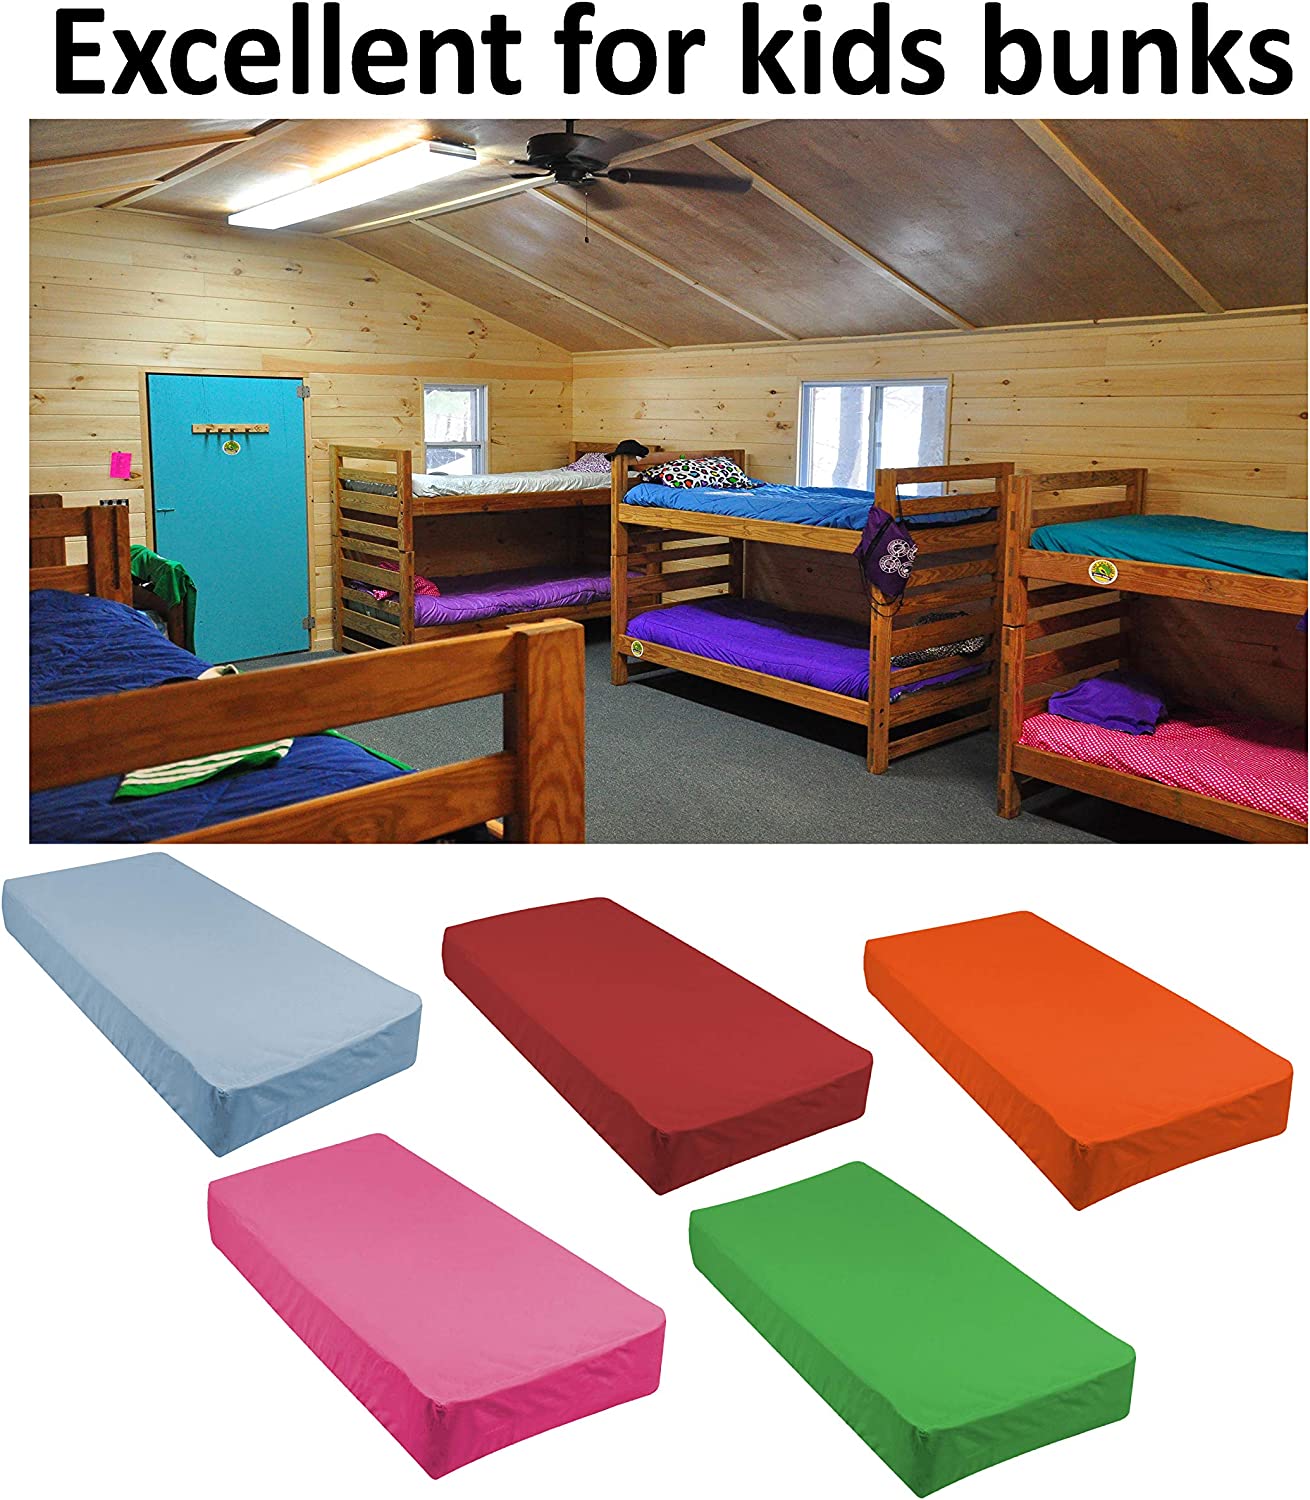 Gilbins Cot Size 30" x 75" Fitted Sheet, Made of Ultra Soft Cotton, Perfect for Camp Bunk Beds / RVs / Guest Beds Hot Pink